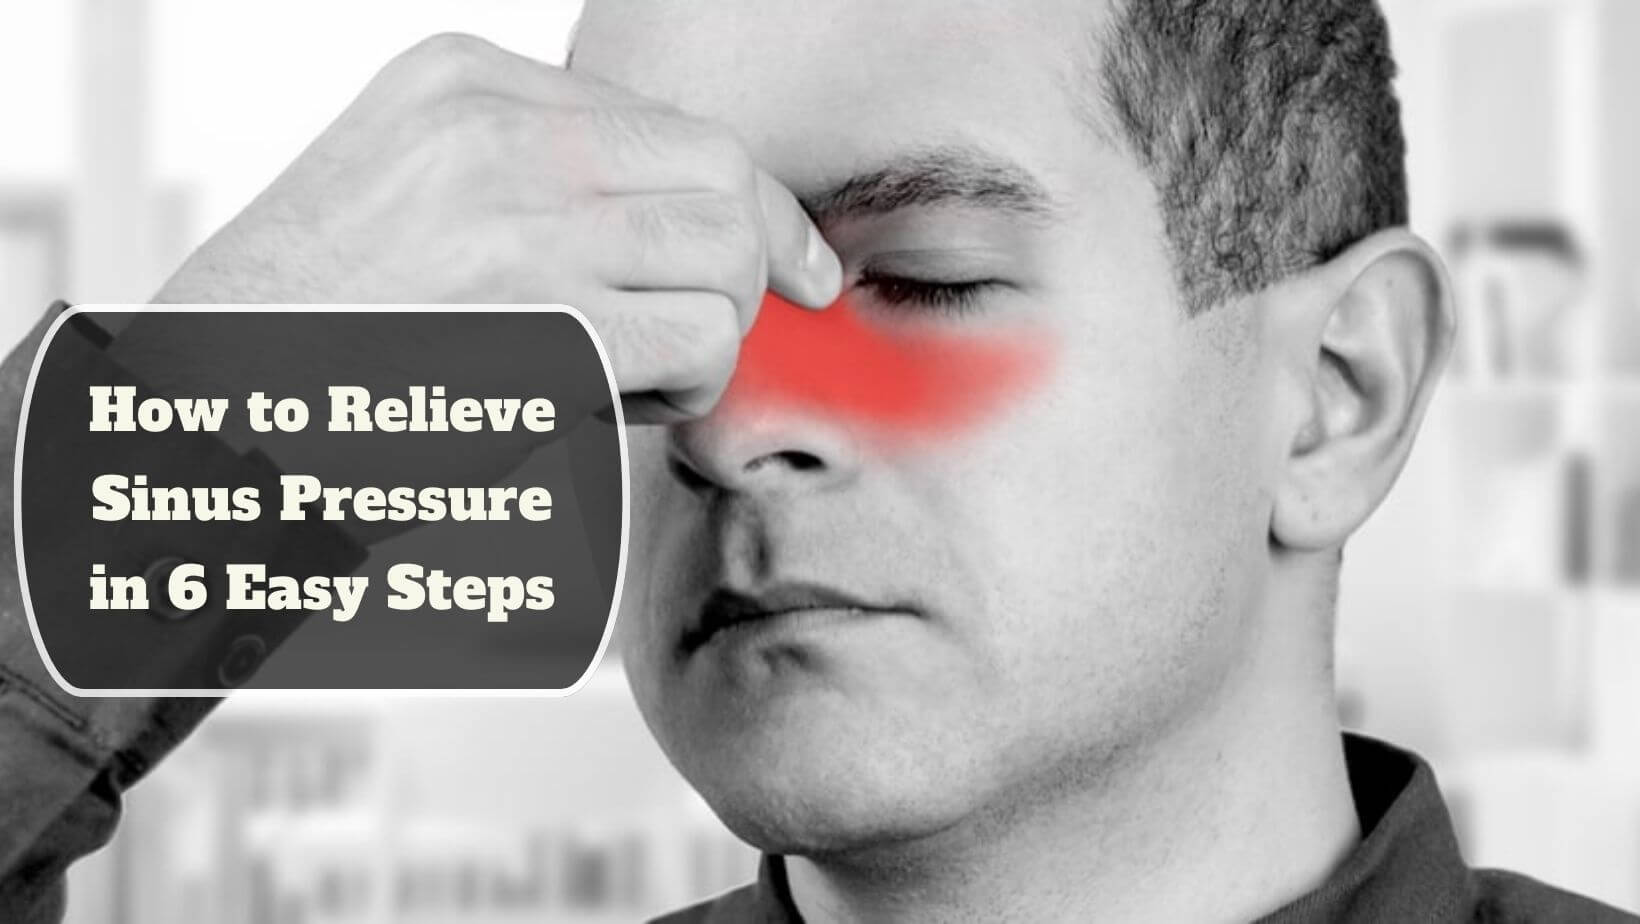 How to Relieve Sinus Pressure